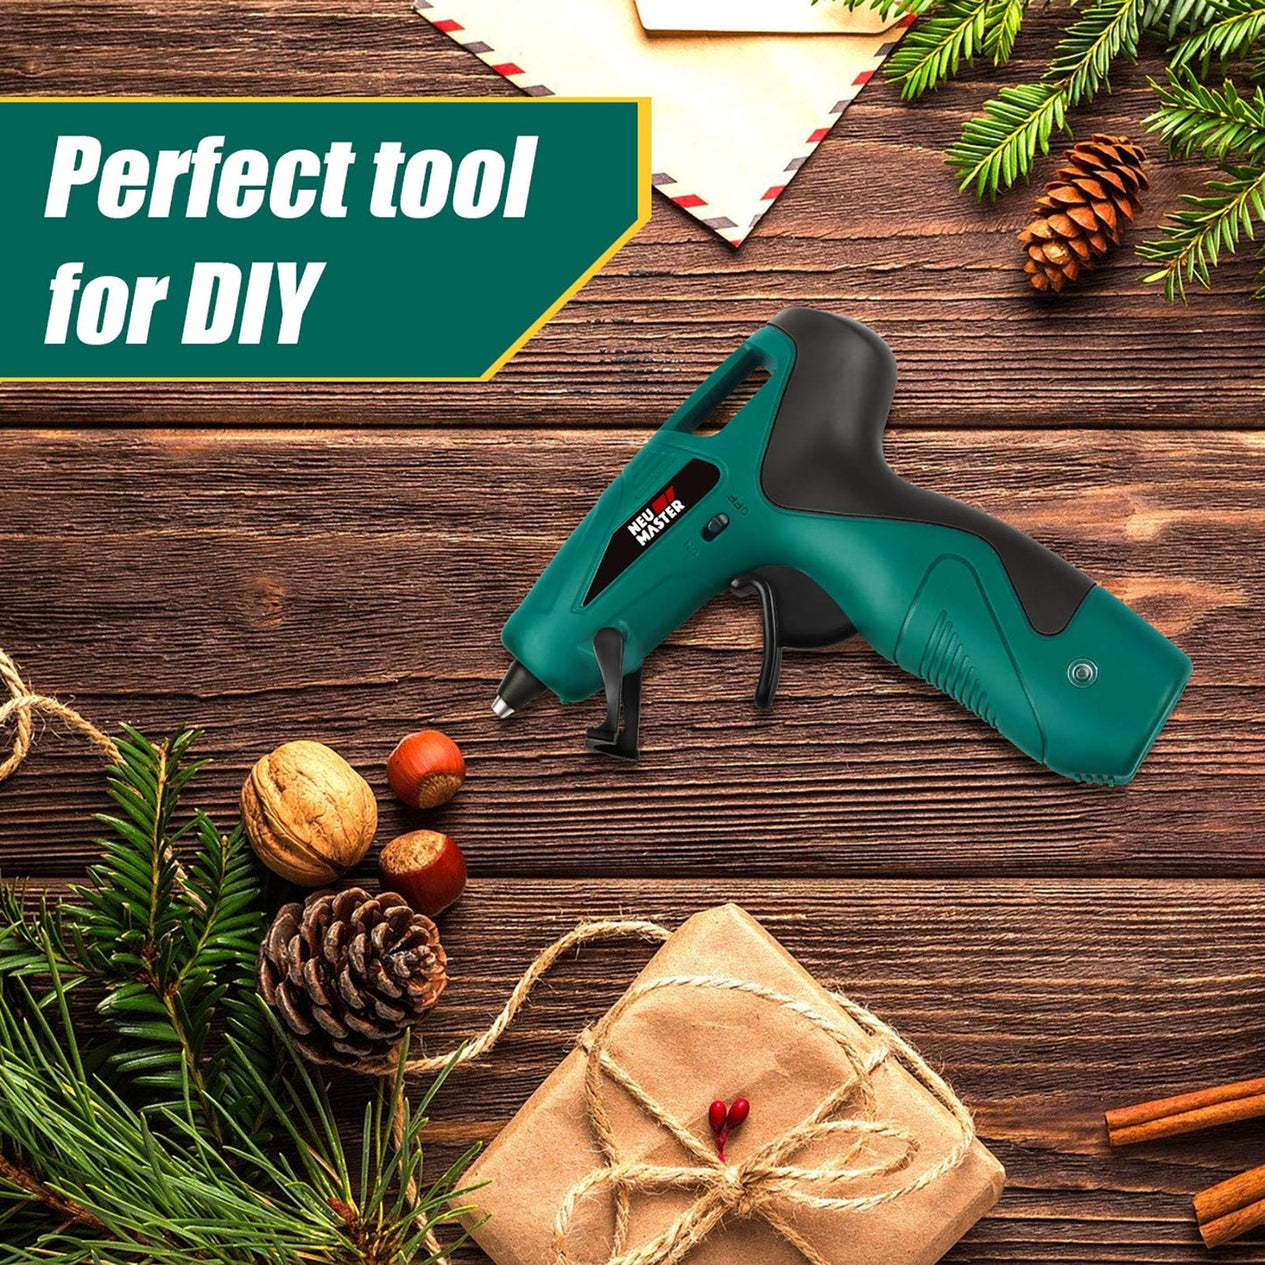 Best Gifts for DIYers Under $30